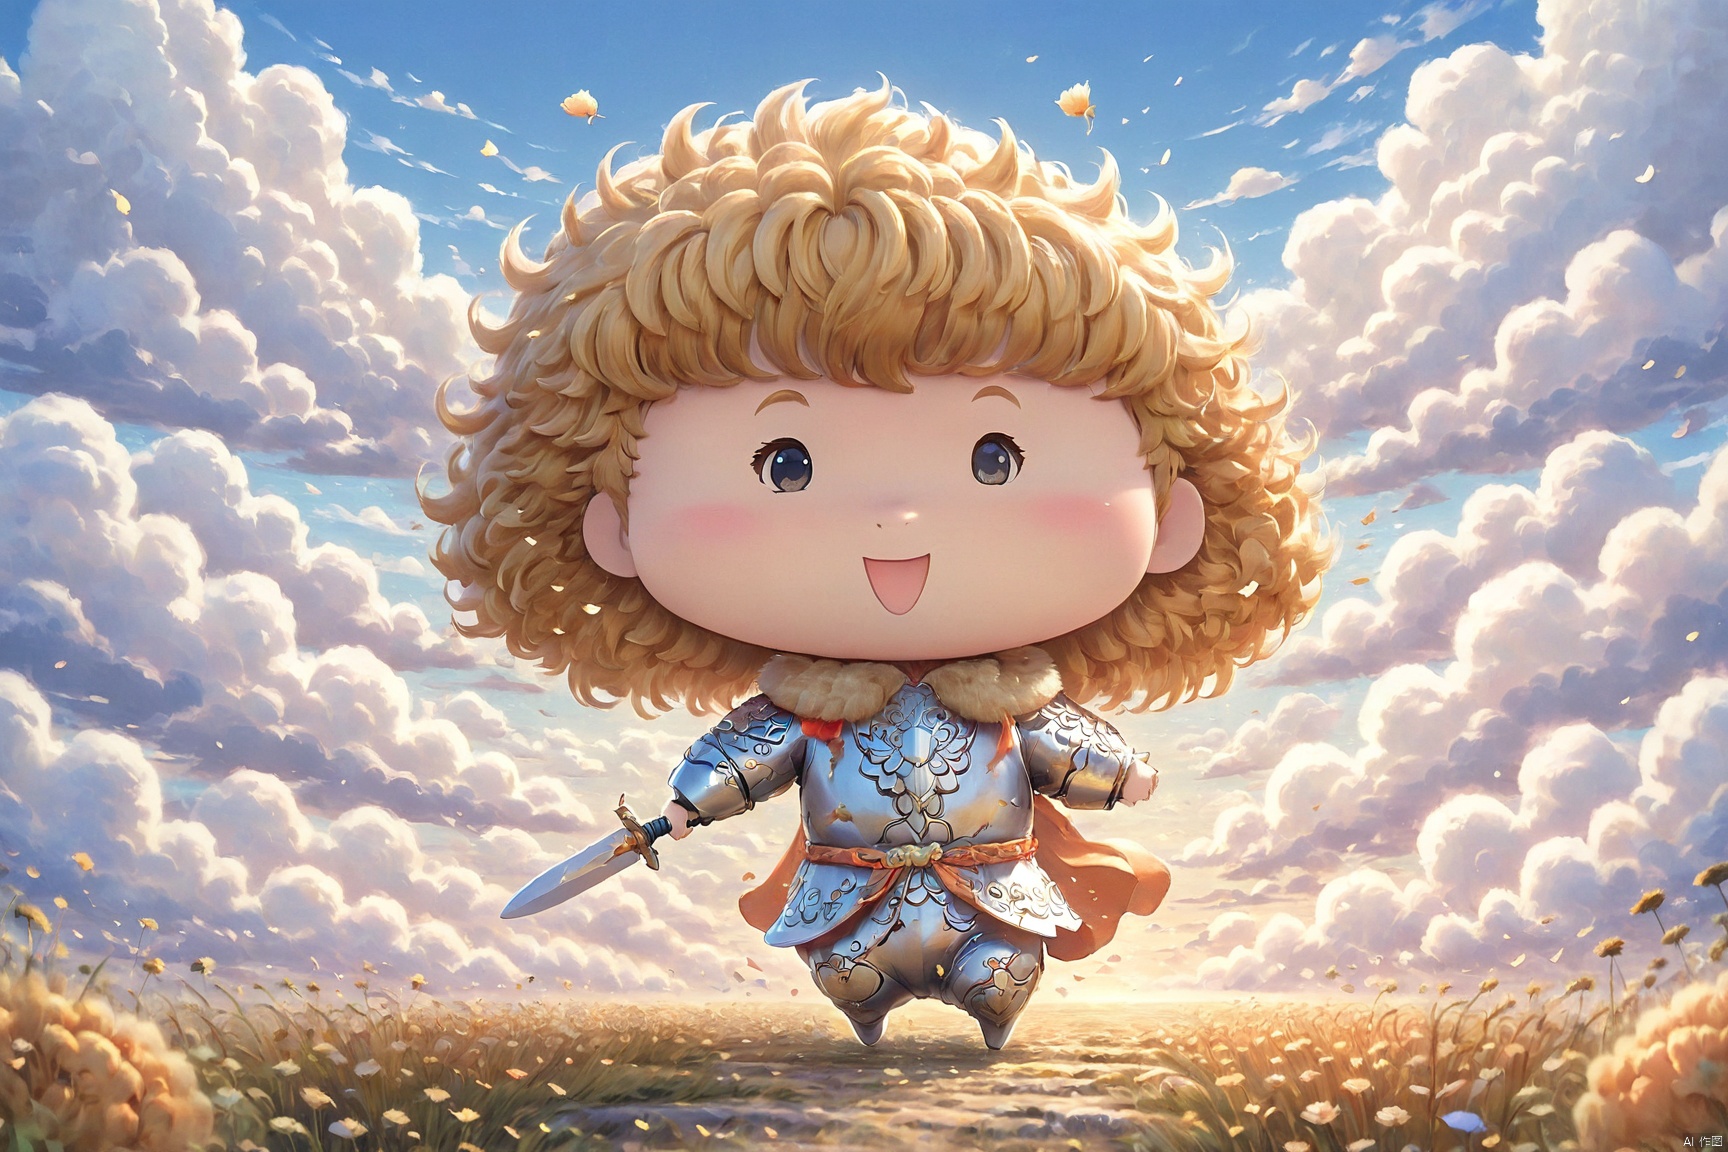 Panorama view: a cute baby, dressed in armor and holding a sword, rides on a woolly mammoth on the African savannah. Lions, tigers, and cheetahs bow down before him. The oil painting style and the art style of Hayao Miyazaki give the image a unique touch.